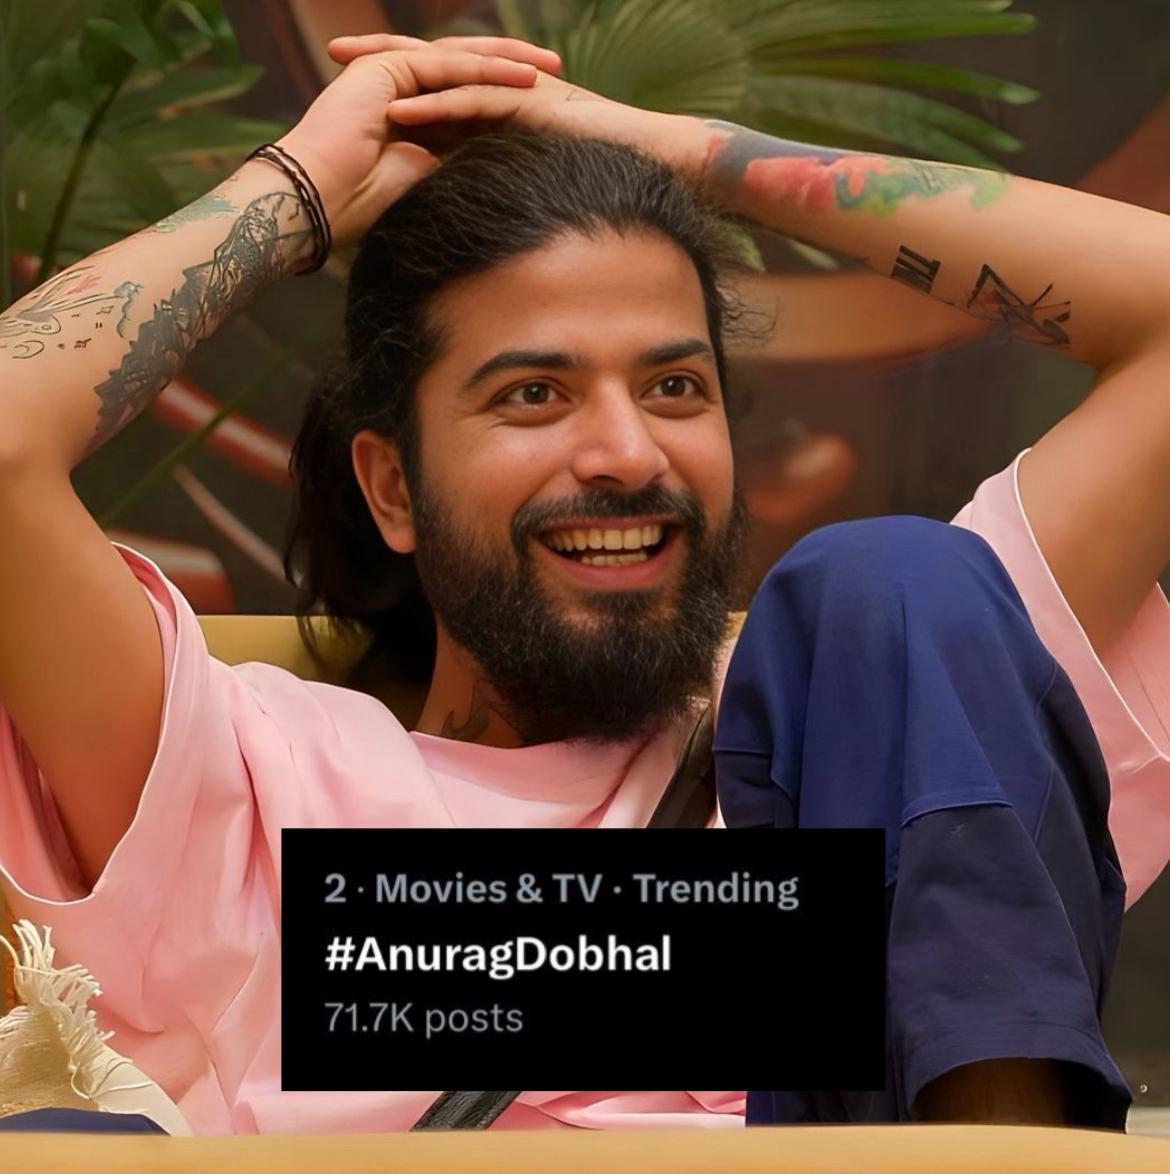 Anurag Dobhal takes social media by a storm; trends at 2nd position on X in India